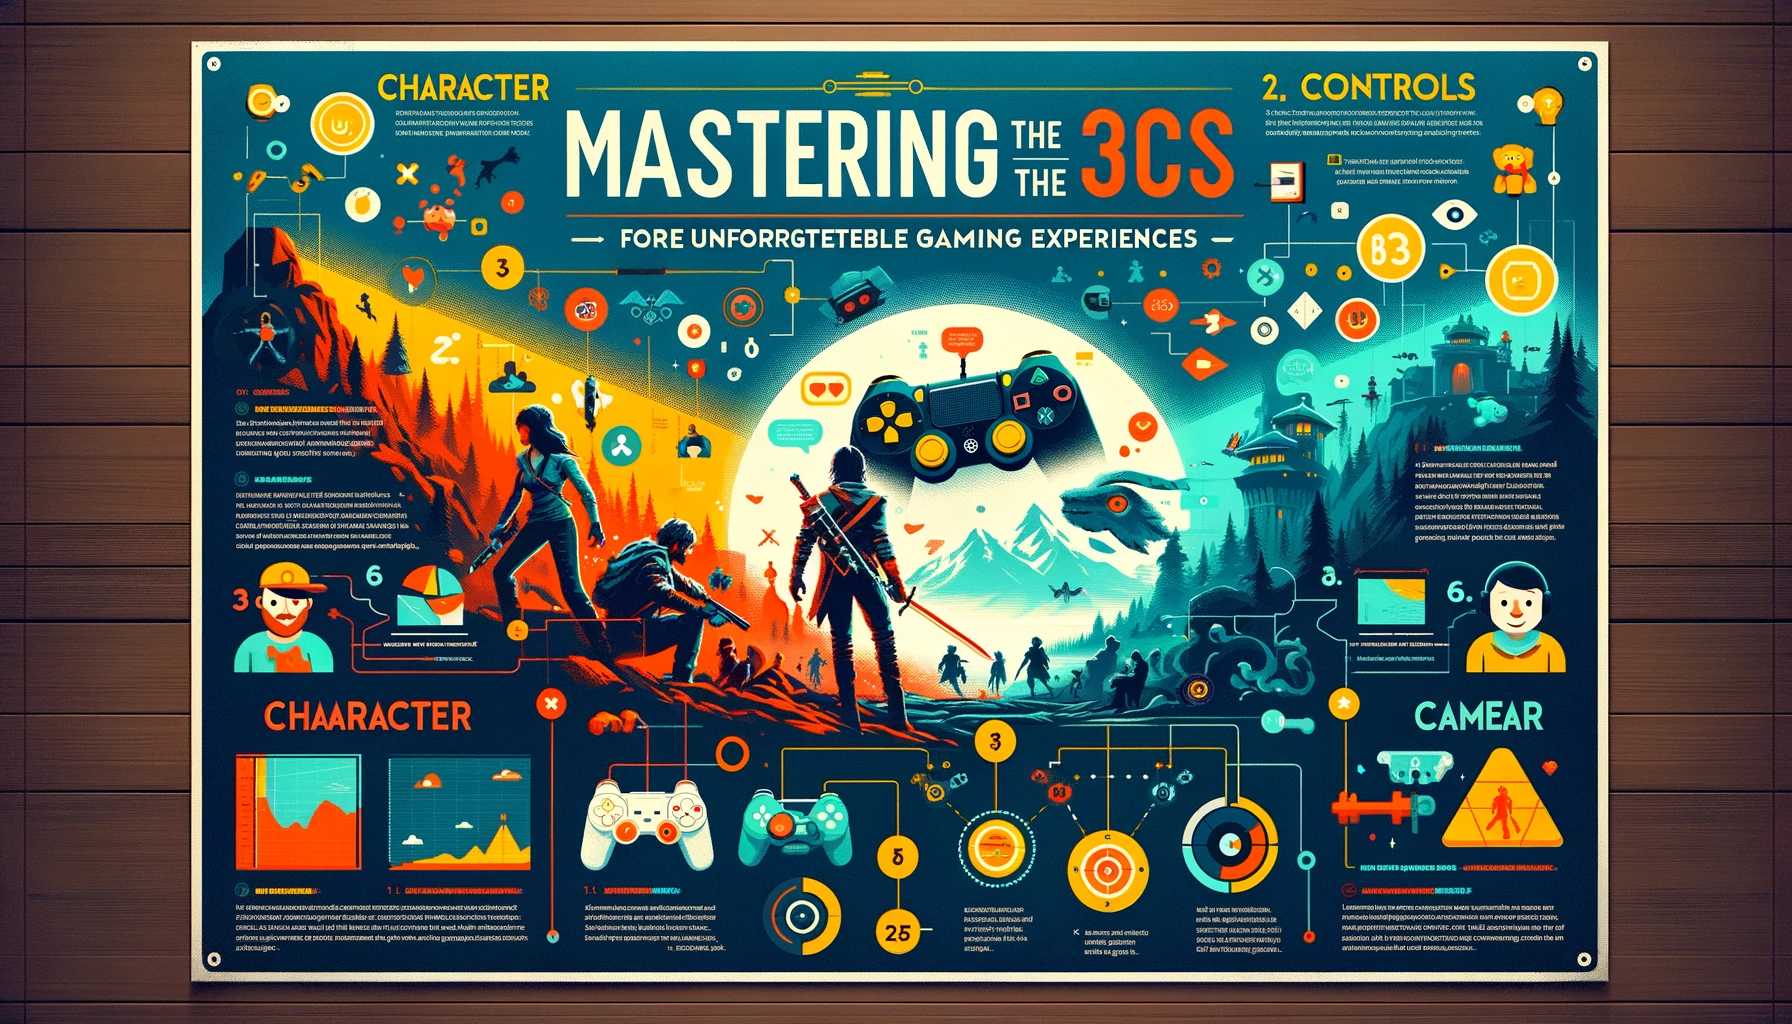 Mastering the 3Cs: How Character, Controls, and Camera Forge Unforgettable Gaming Experiences